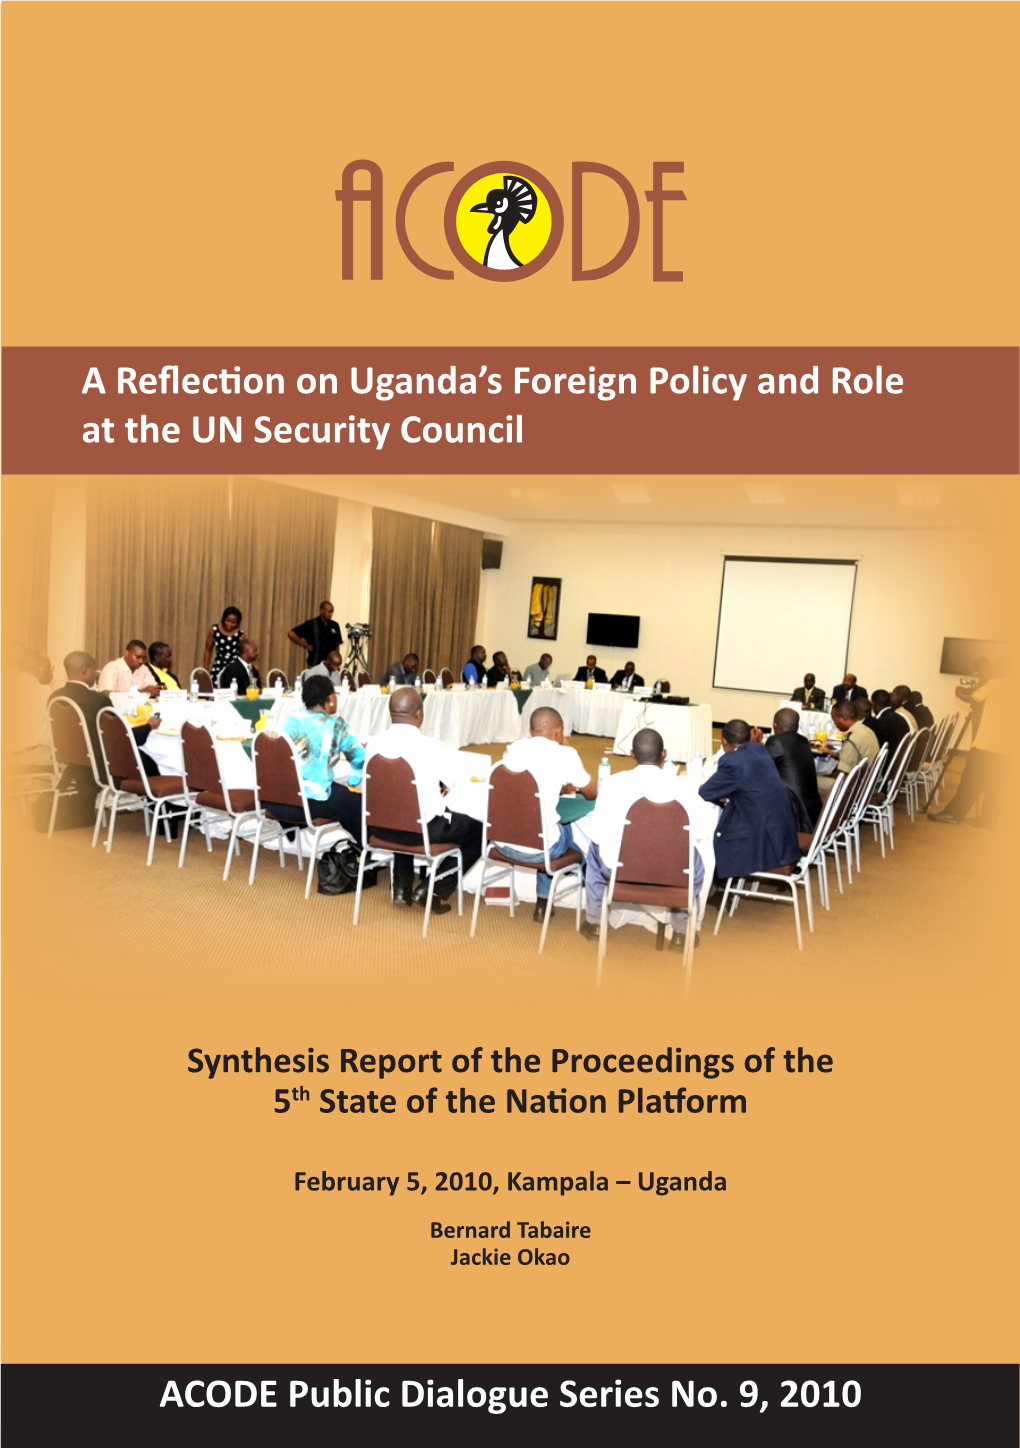 A Reflection on Uganda's Foreign Policy and Role at the UN Security